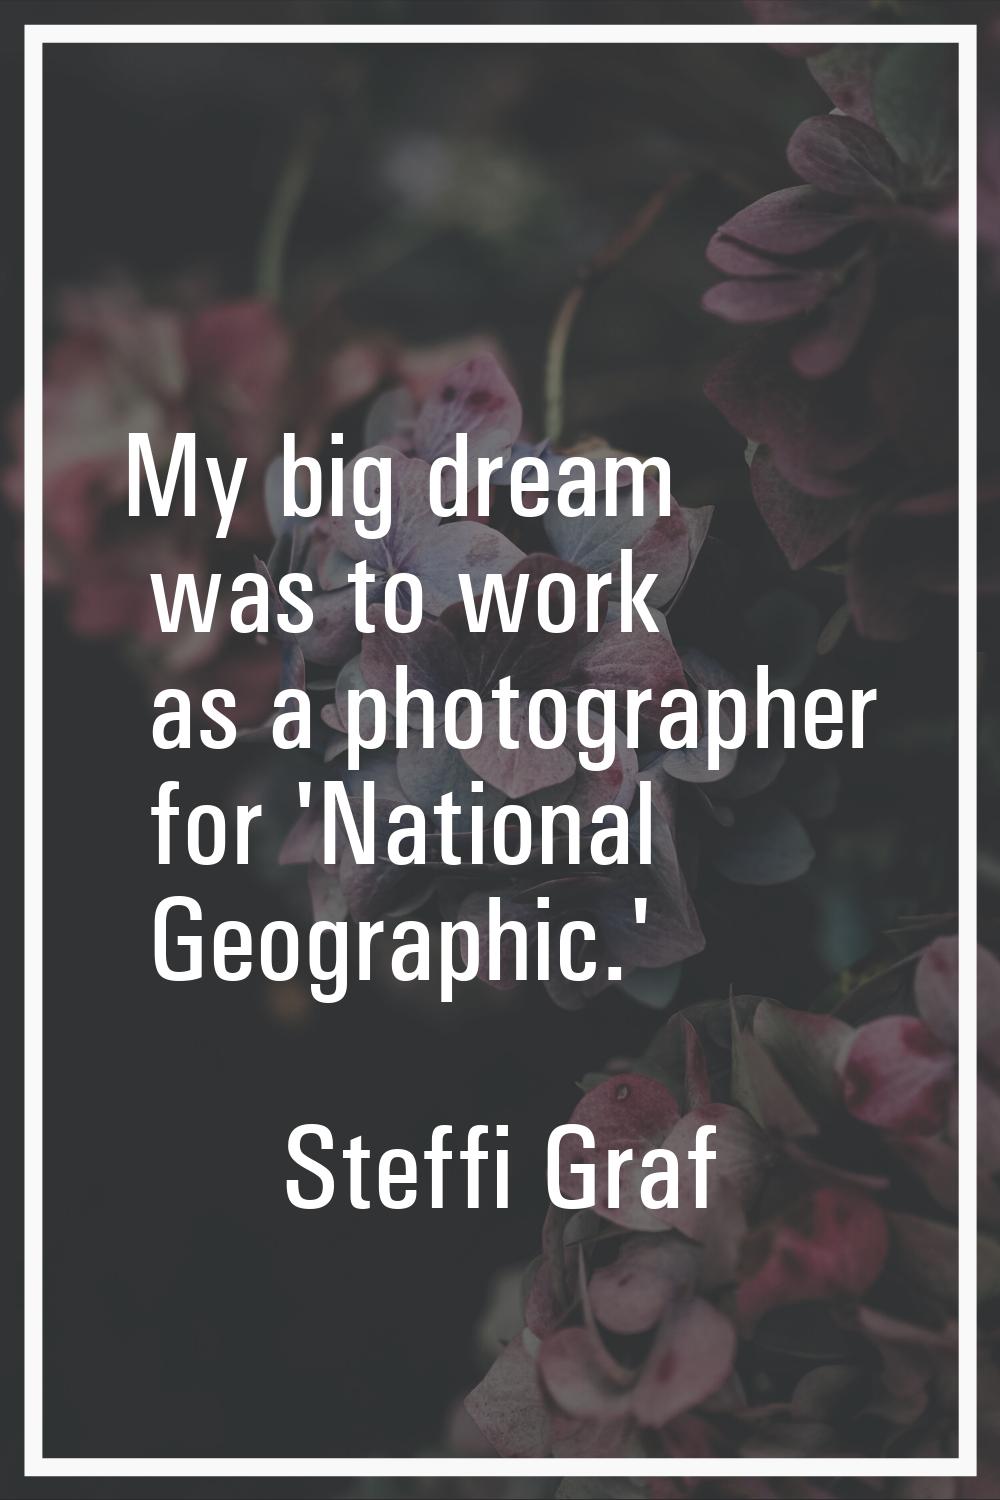 My big dream was to work as a photographer for 'National Geographic.'